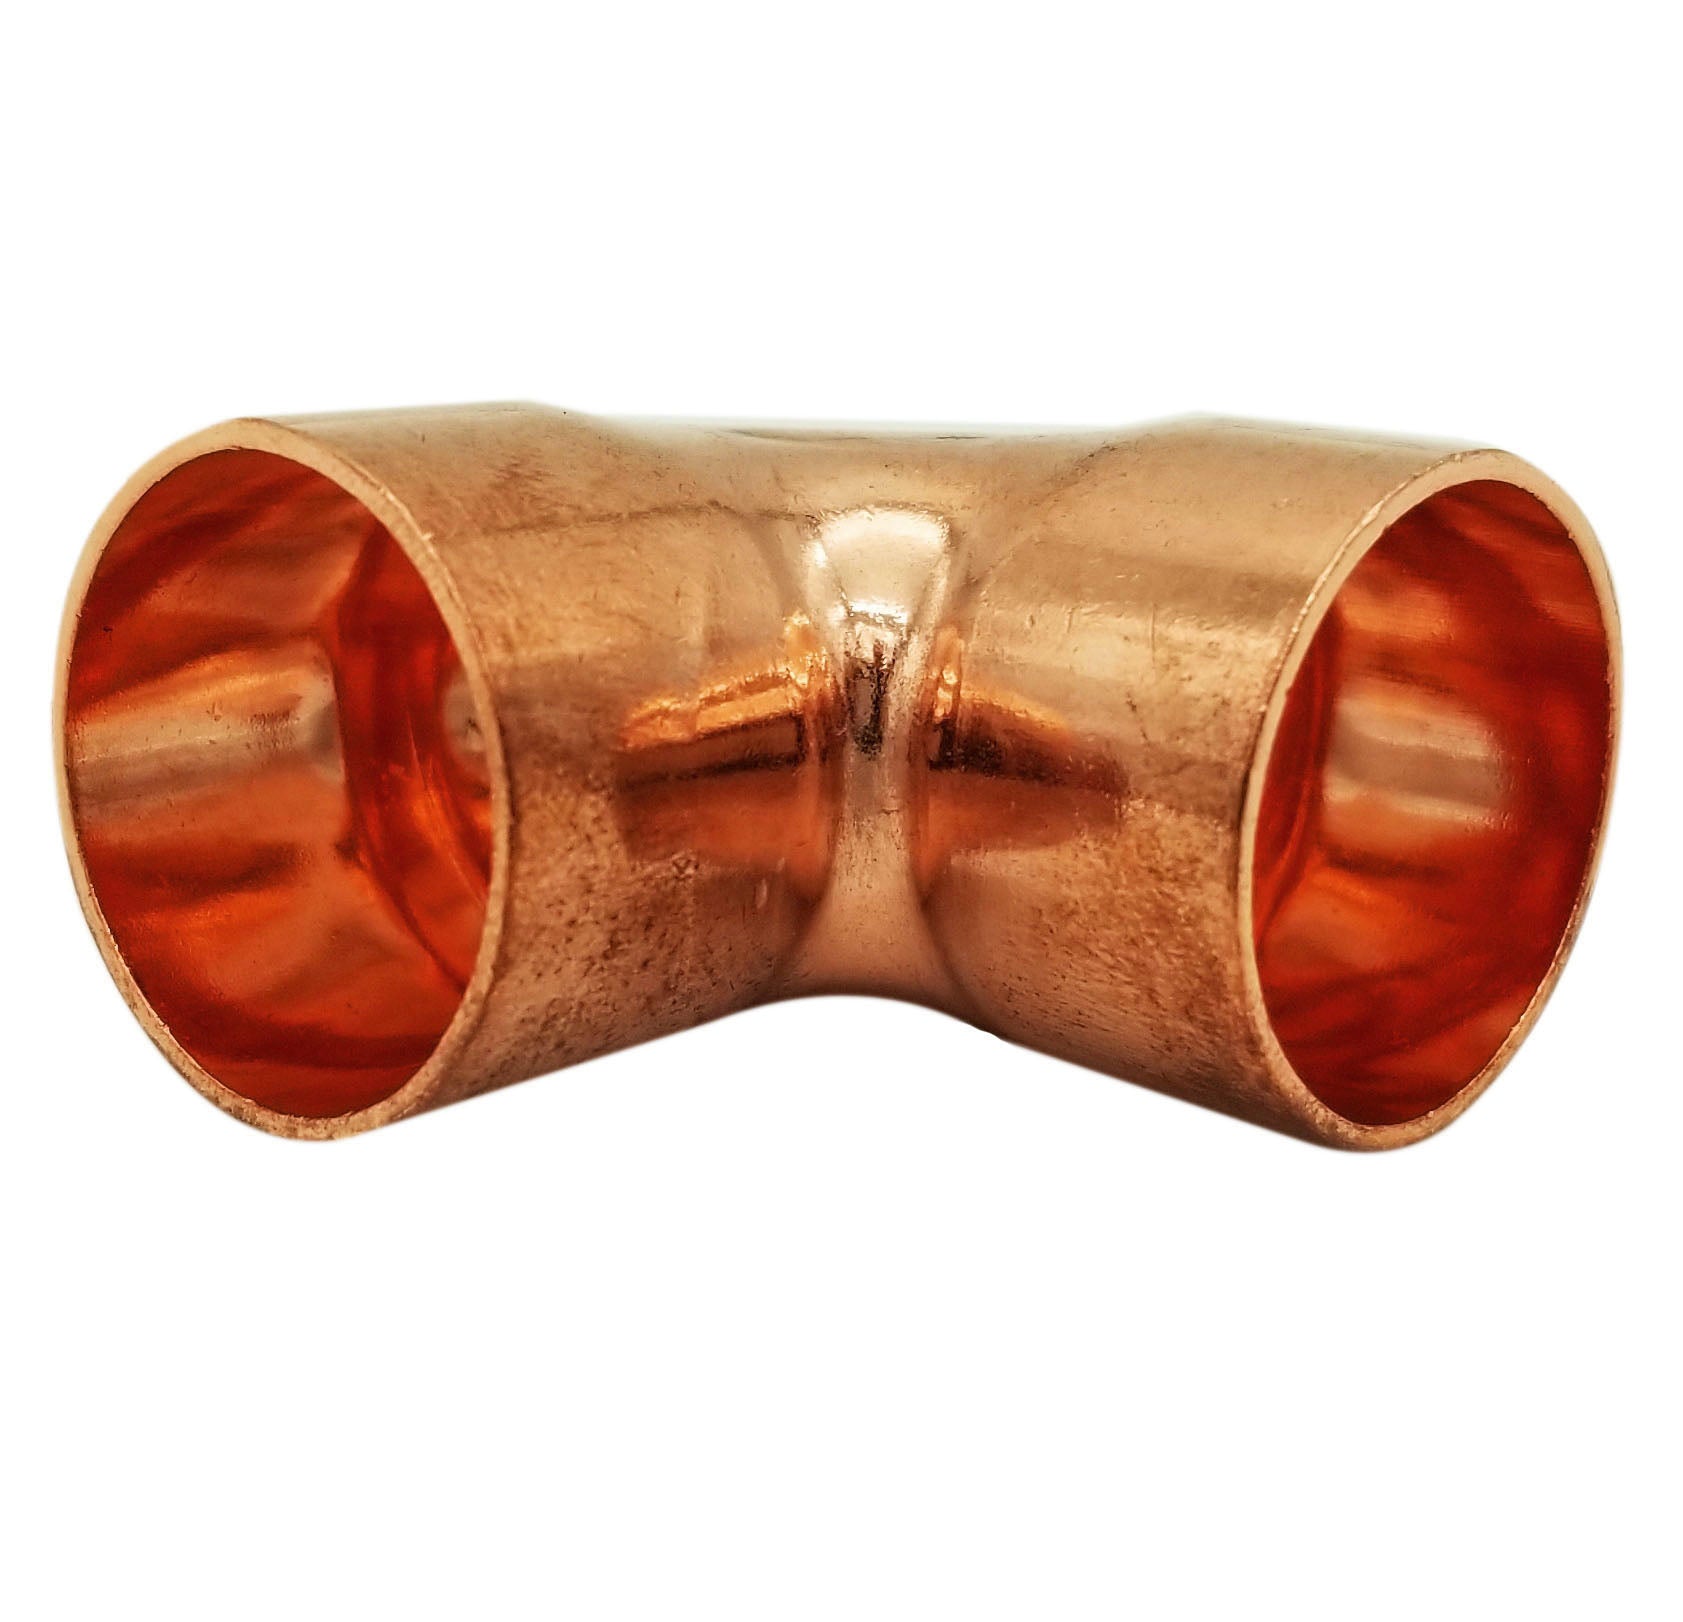 Copper Fitting 3/8 Inch (HVAC Outer Dimension) 1/4 Inch (Plumbing Inner Dimension) - 45 Degree Copper Pressure Elbow & HVAC – 99.9% Pure Copper - 5 Pack